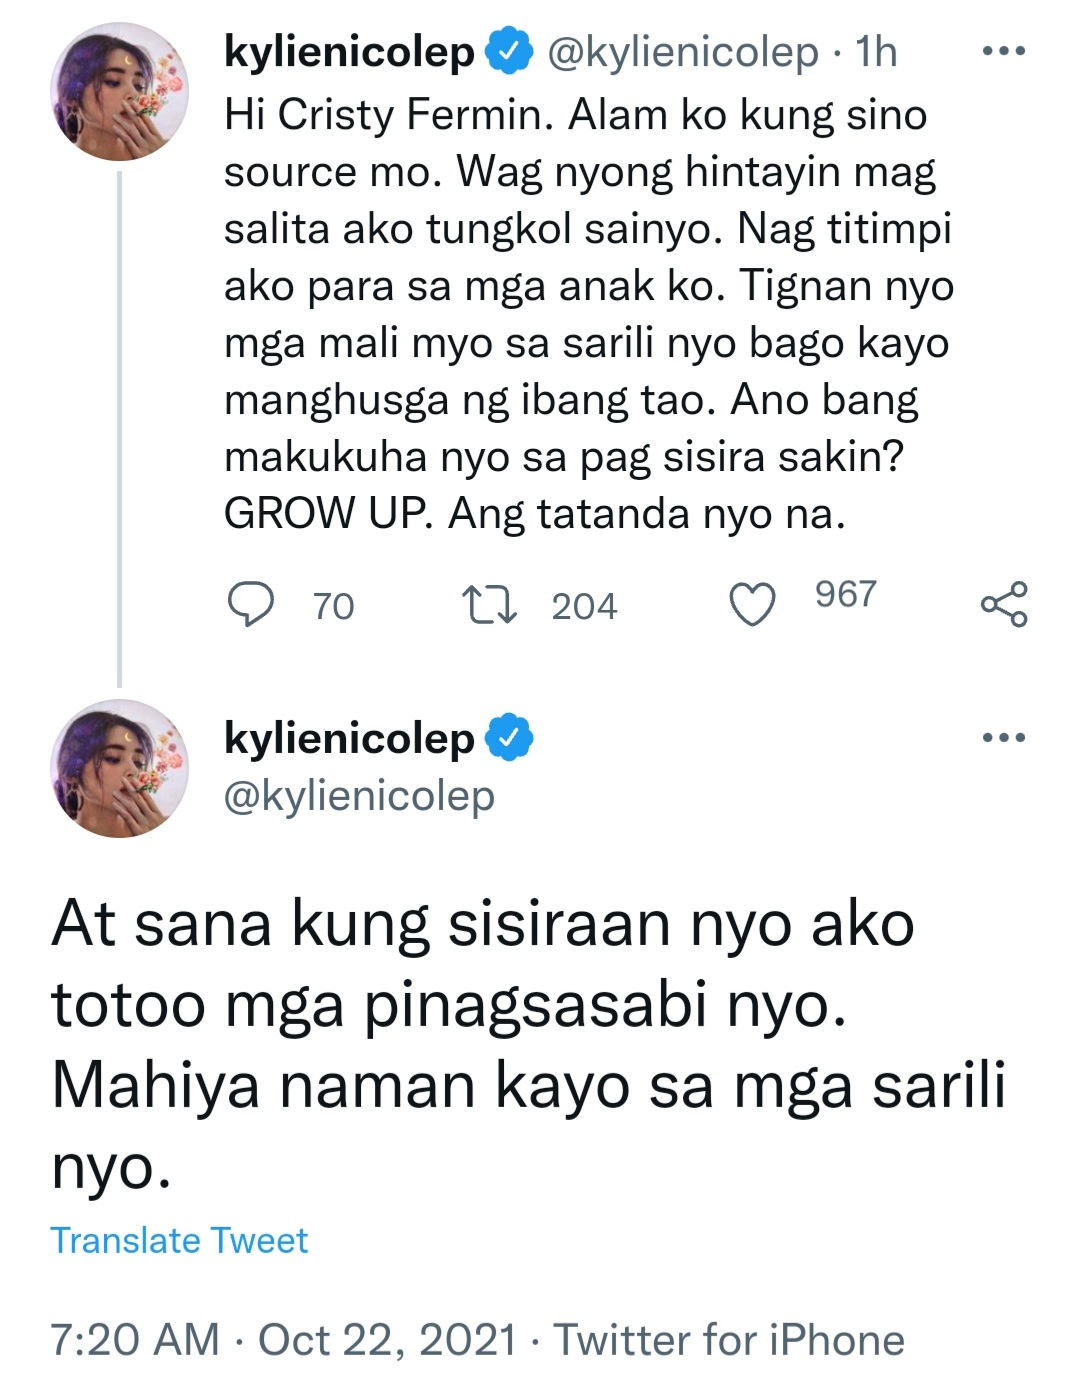 Kylie padilla claps back at cristy fermin